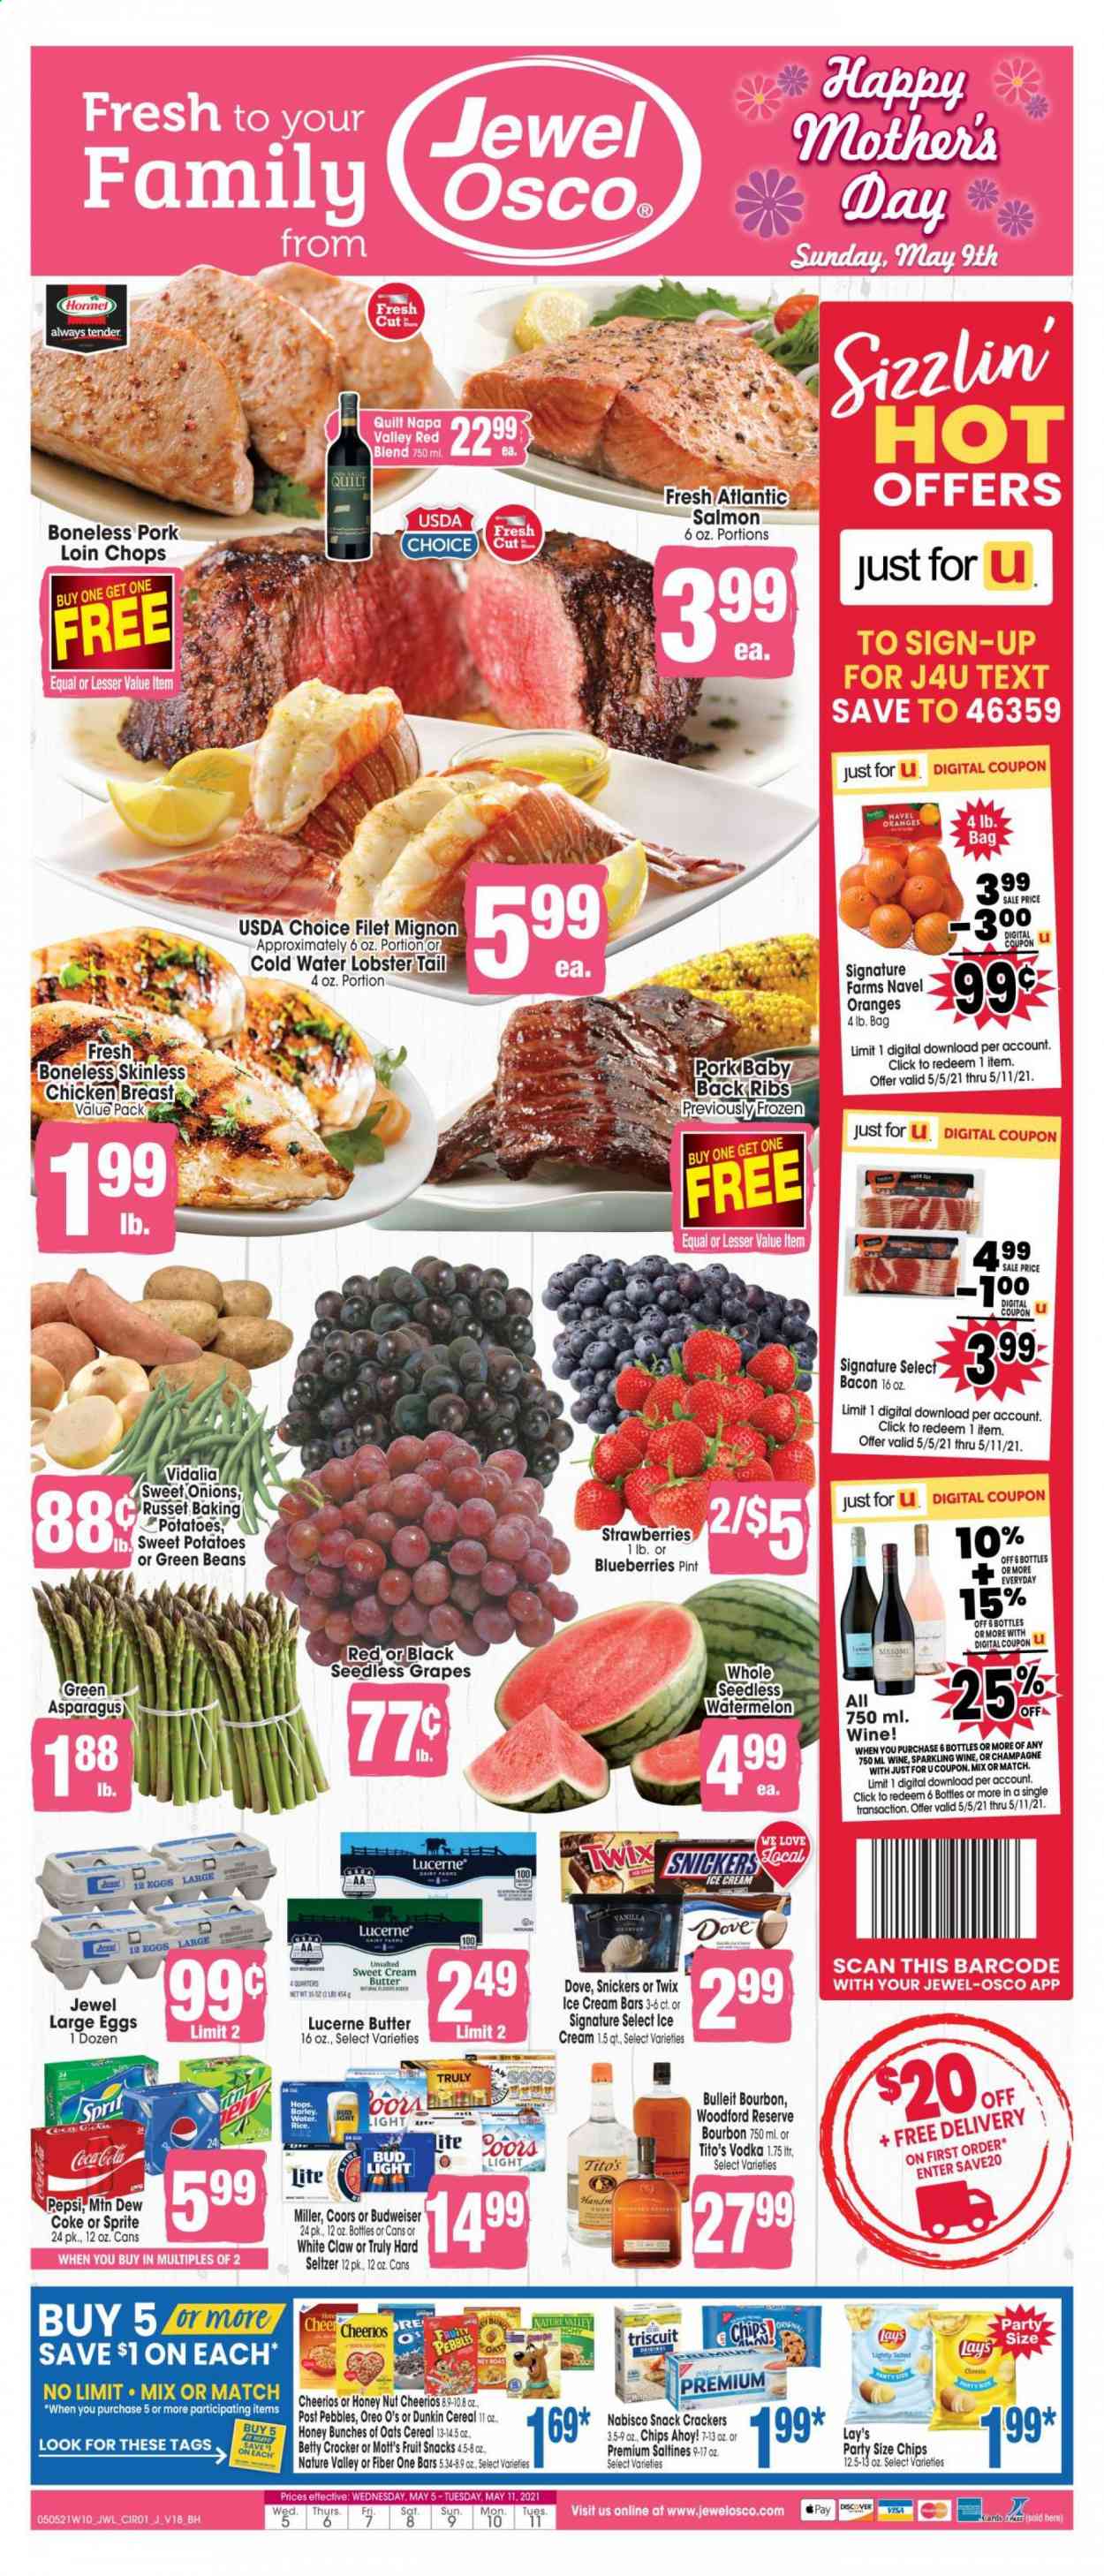 thumbnail - Jewel Osco Flyer - 05/05/2021 - 05/11/2021 - Sales products - Budweiser, Coors, seedless grapes, asparagus, beans, green beans, russet potatoes, sweet potato, potatoes, blueberries, grapes, strawberries, watermelon, oranges, Mott's, lobster, salmon, lobster tail, Hormel, bacon, Oreo, large eggs, butter, ice cream, ice cream bars, Snickers, Twix, crackers, fruit snack, Chips Ahoy!, Lay’s, saltines, cereals, Cheerios, Fruity Pebbles, Nature Valley, Fiber One, Coca-Cola, Mountain Dew, Sprite, Pepsi, tea, sparkling wine, champagne, wine, vodka, White Claw, Hard Seltzer, TRULY, beer, Bud Light, Miller, chicken breasts, beef tenderloin, pork chops, pork loin, pork meat, pork ribs, pork back ribs, Dove, bunches, navel oranges. Page 1.